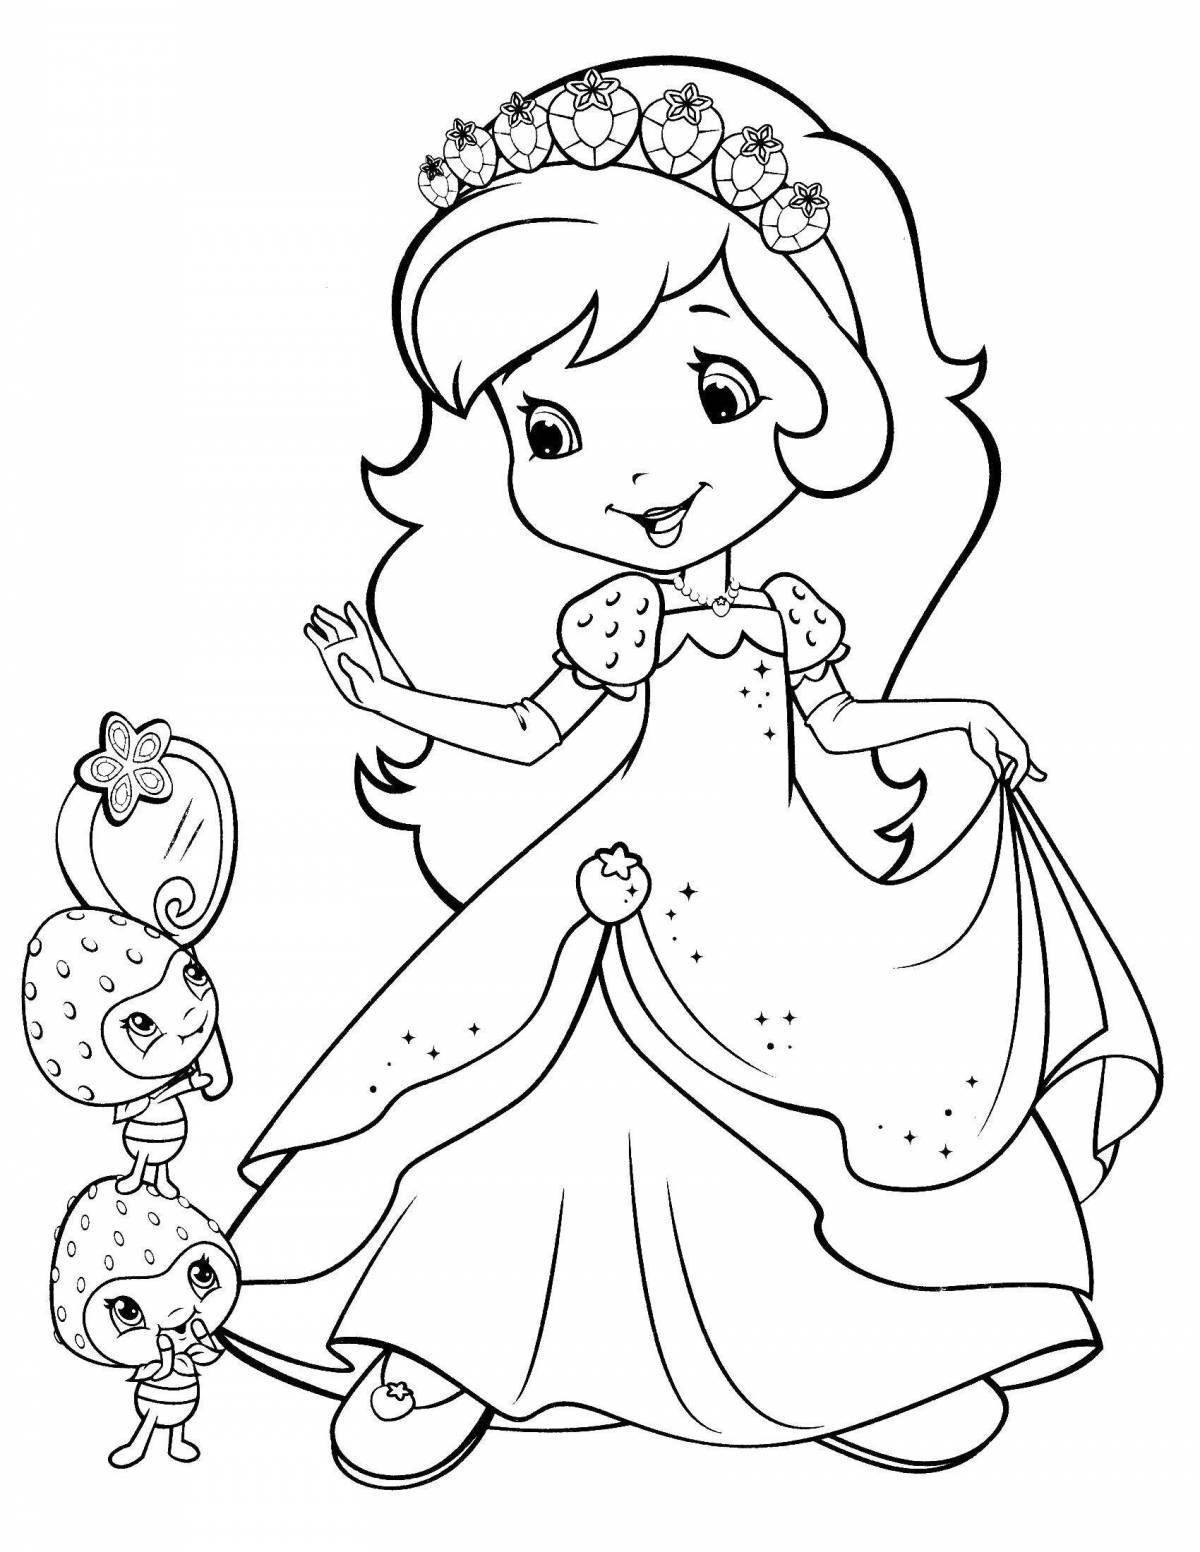 Dreamy princess coloring pages for girls 4-5 years old